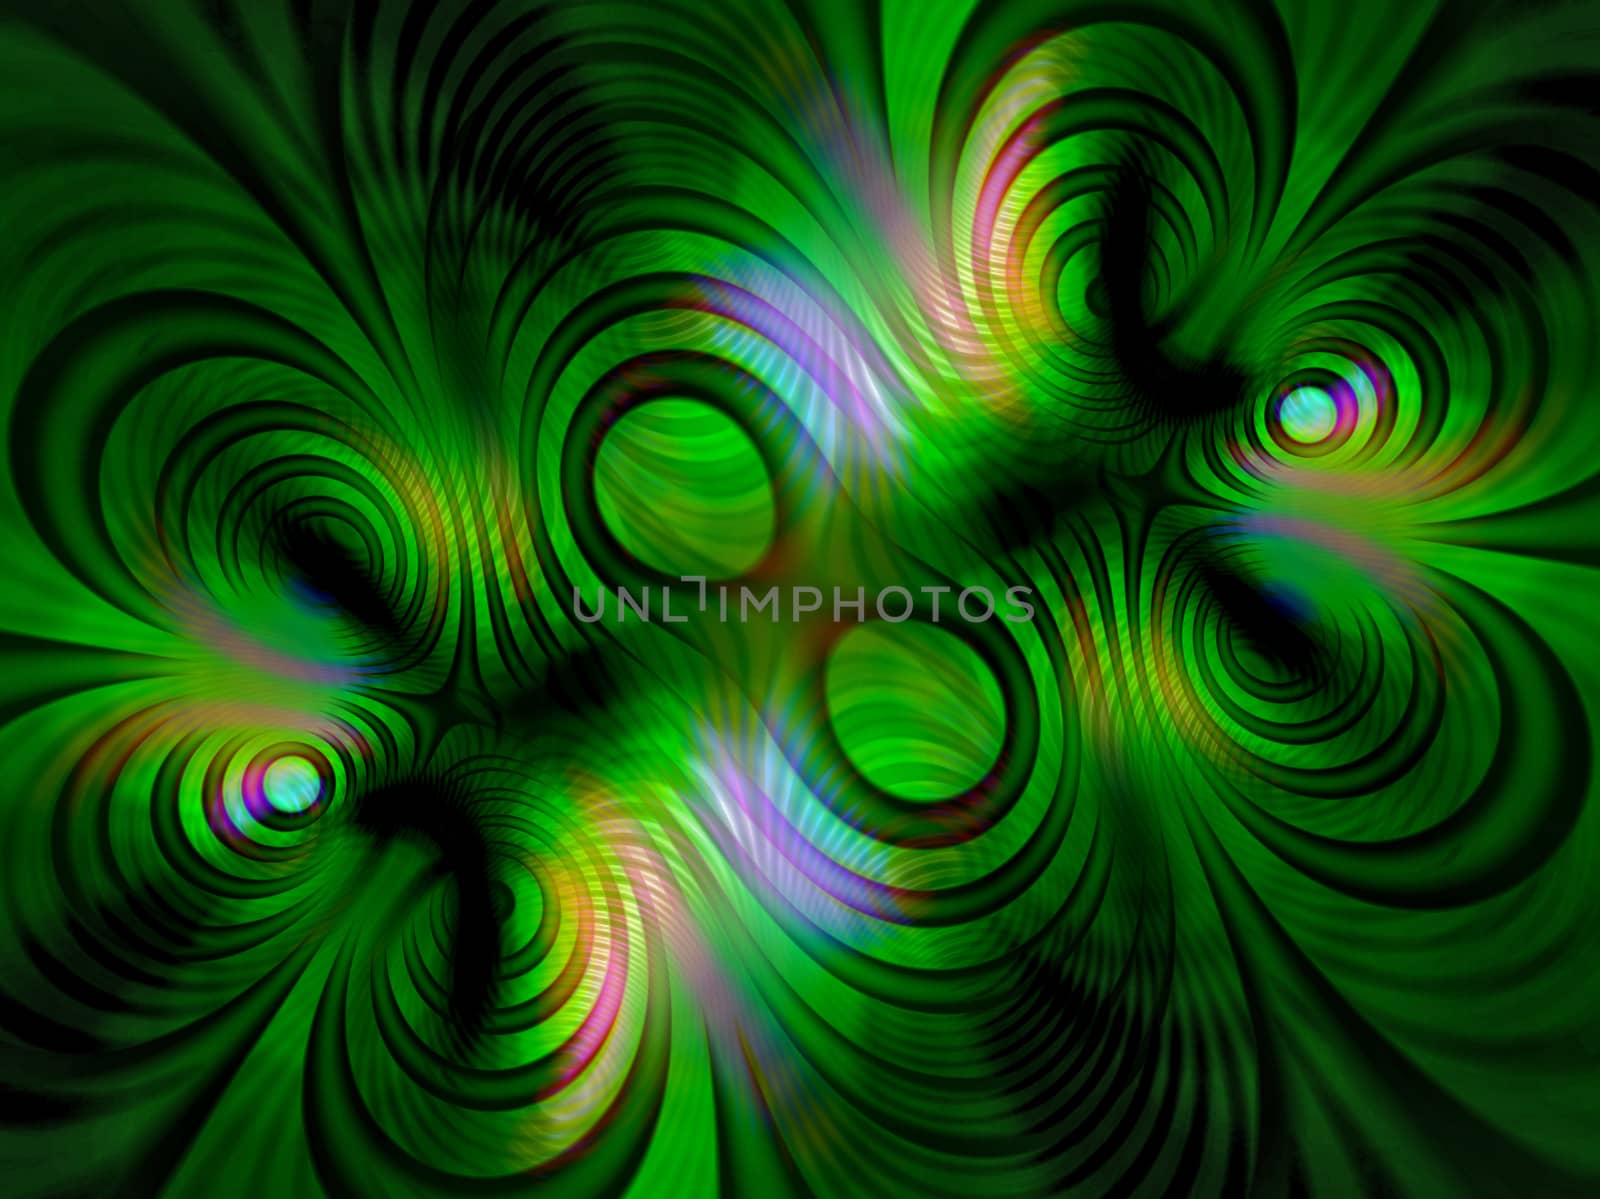 A psychedelic and multi-hued image.